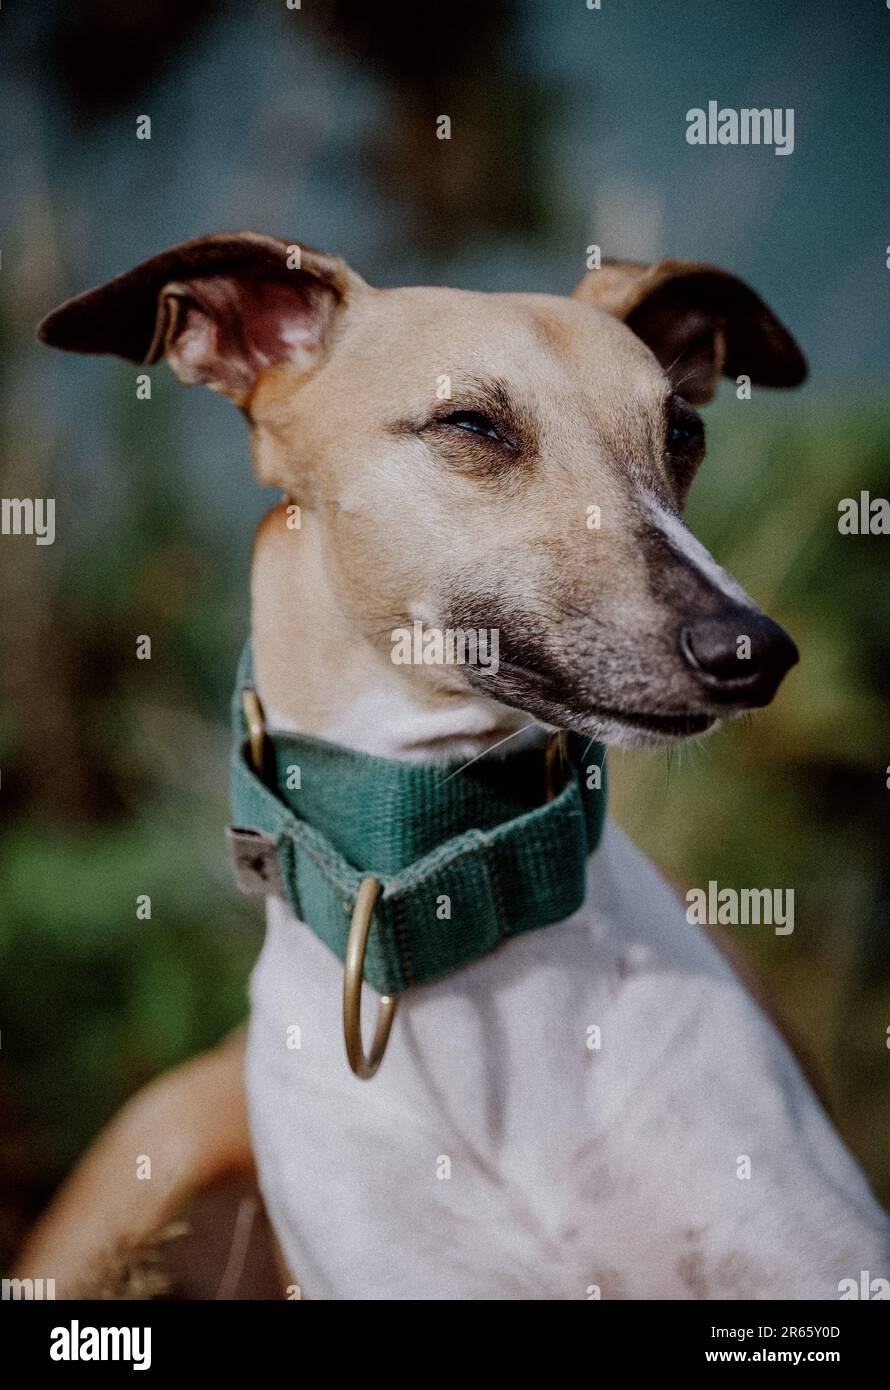 A close-up shot of a domestic canine with a brown and white coat wearing a collar and tag Stock Photo